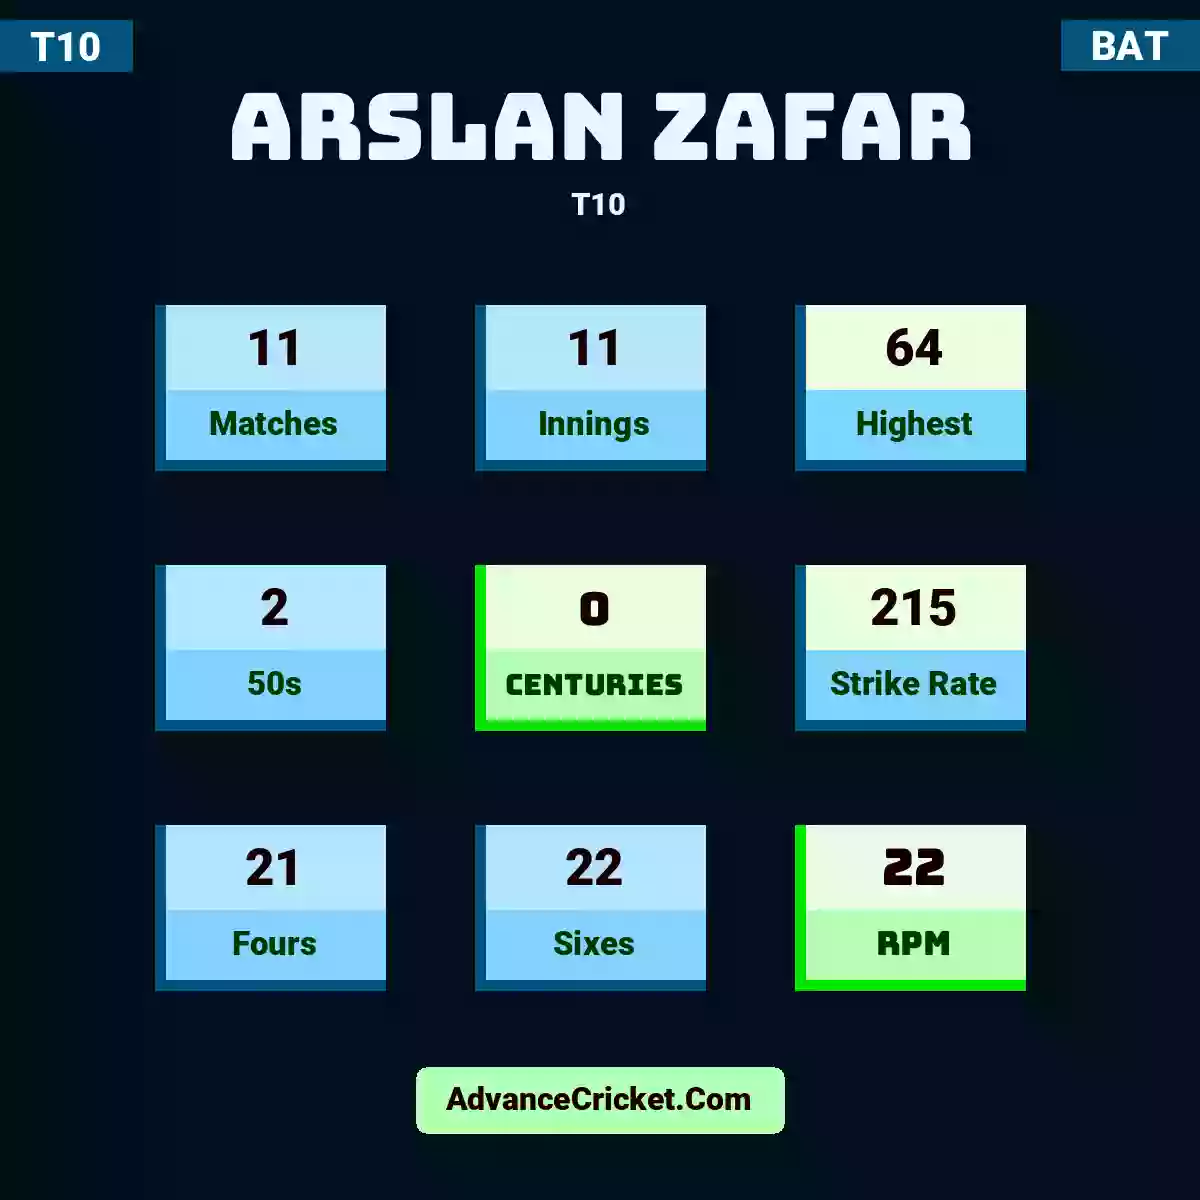 Arslan Zafar T10 , Arslan Zafar played 11 matches, scored 64 runs as highest, 2 half-centuries, and 0 centuries, with a strike rate of 215. A.Zafar hit 21 fours and 22 sixes, with an RPM of 22.